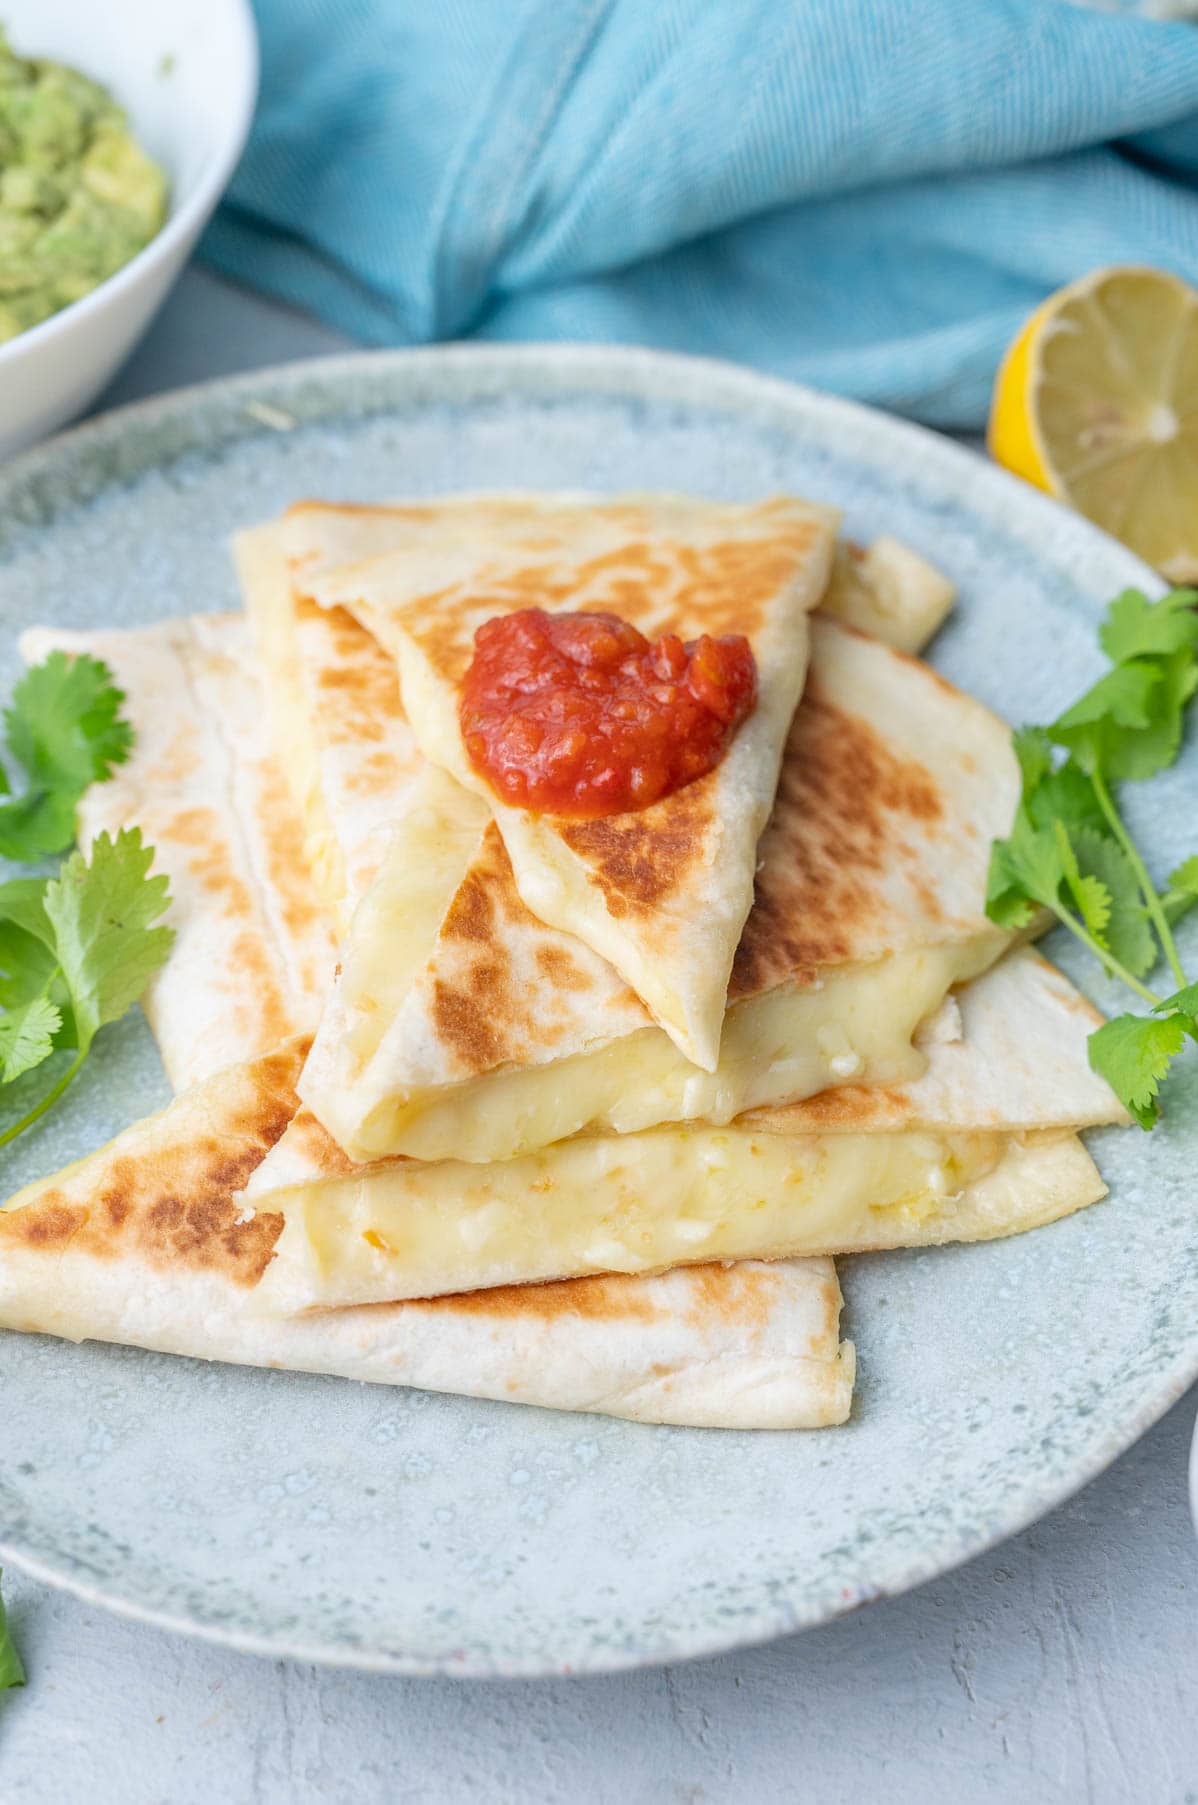 Cheese quesadillas cut into triangles on a green plate.